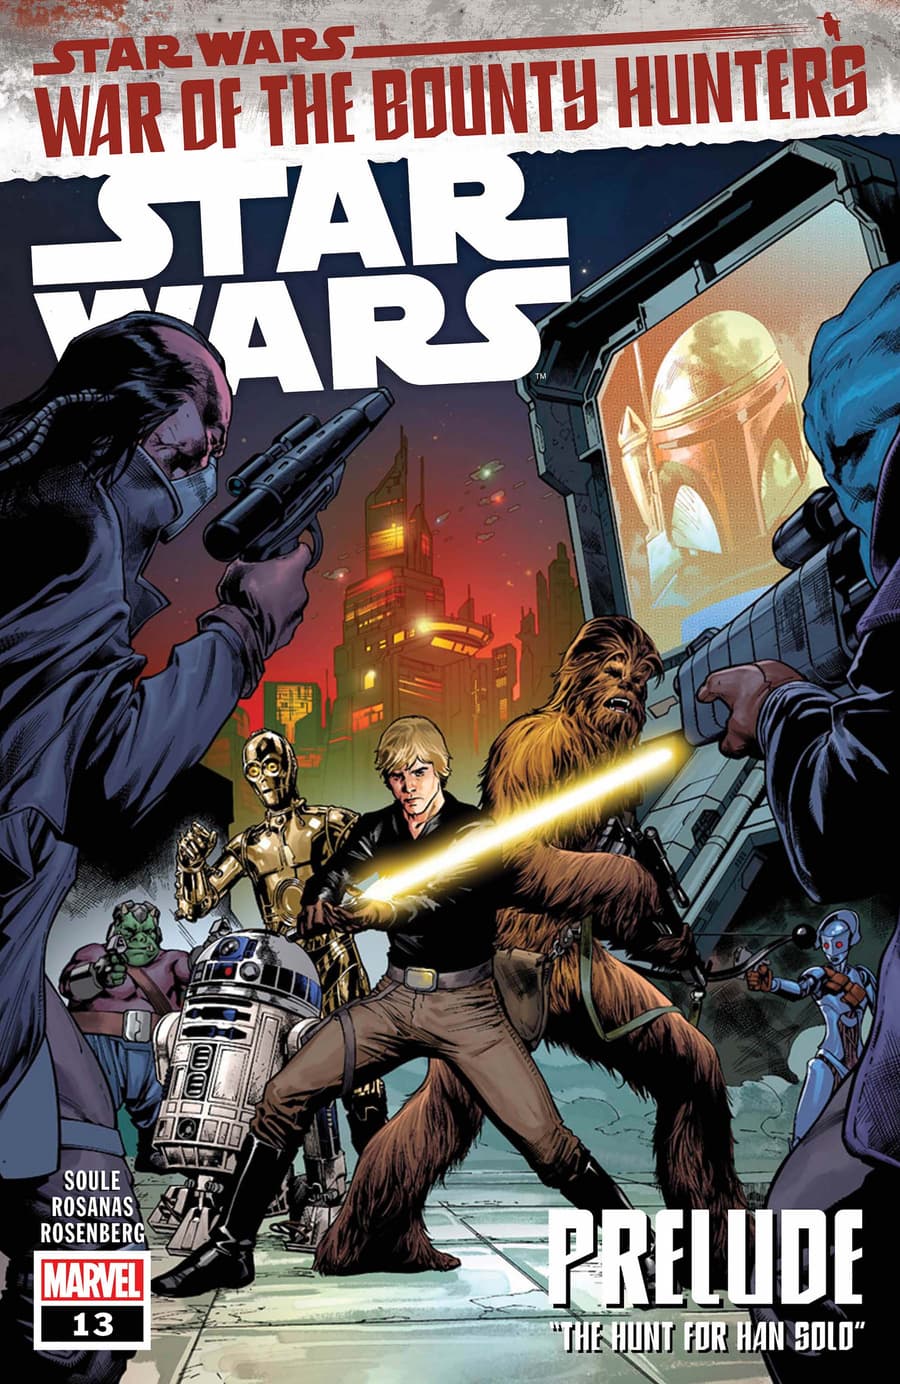 STAR WARS #13 cover by Carlo Pagulayan